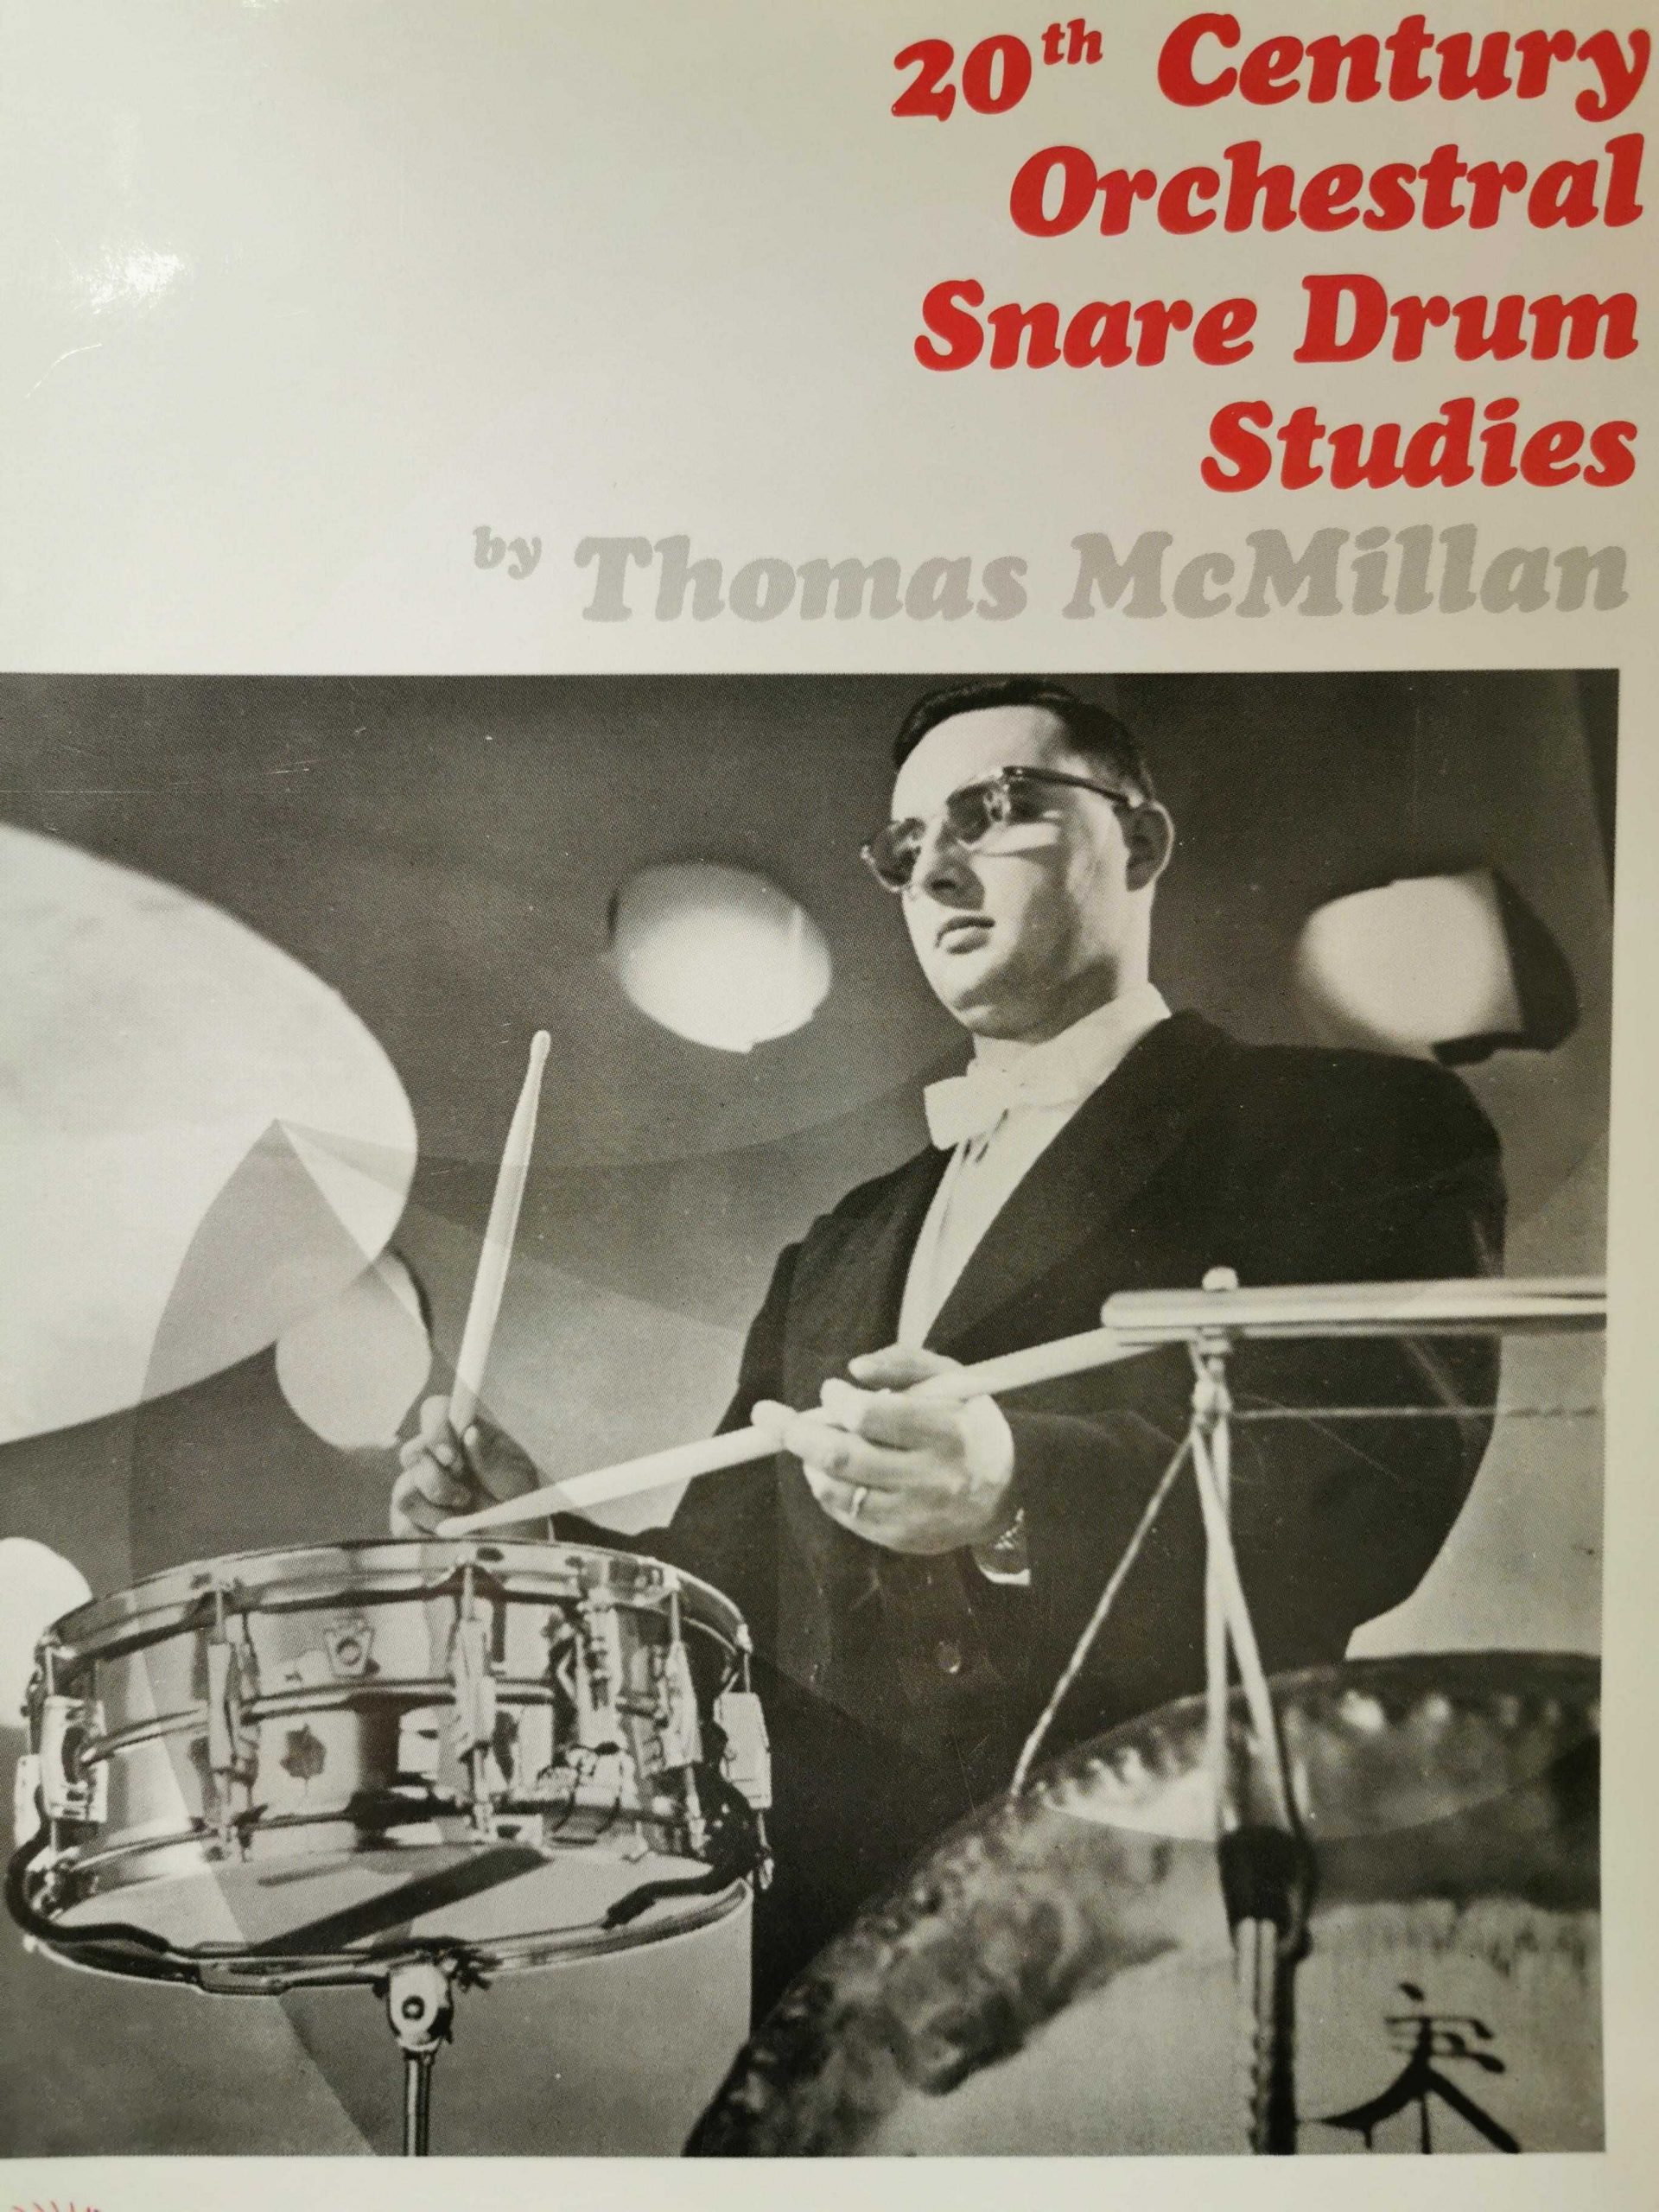 20th Century Orchestral Snare Drum Studies by Thomas McMillan